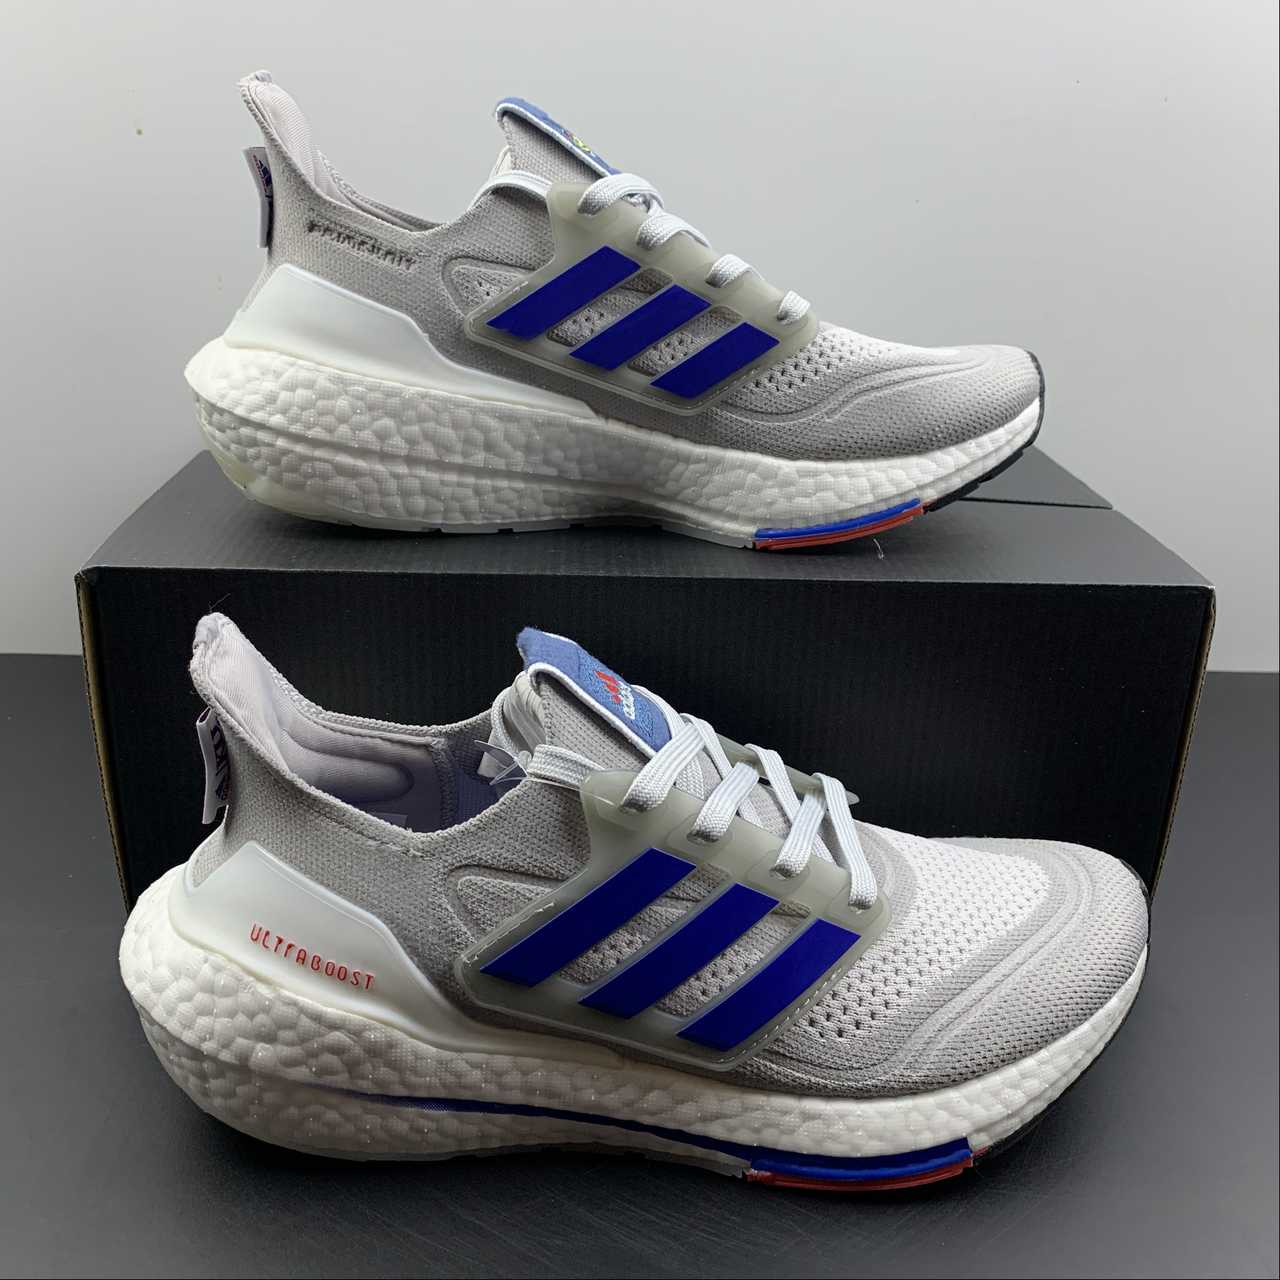 adidas shoes price in kuwait india bank website